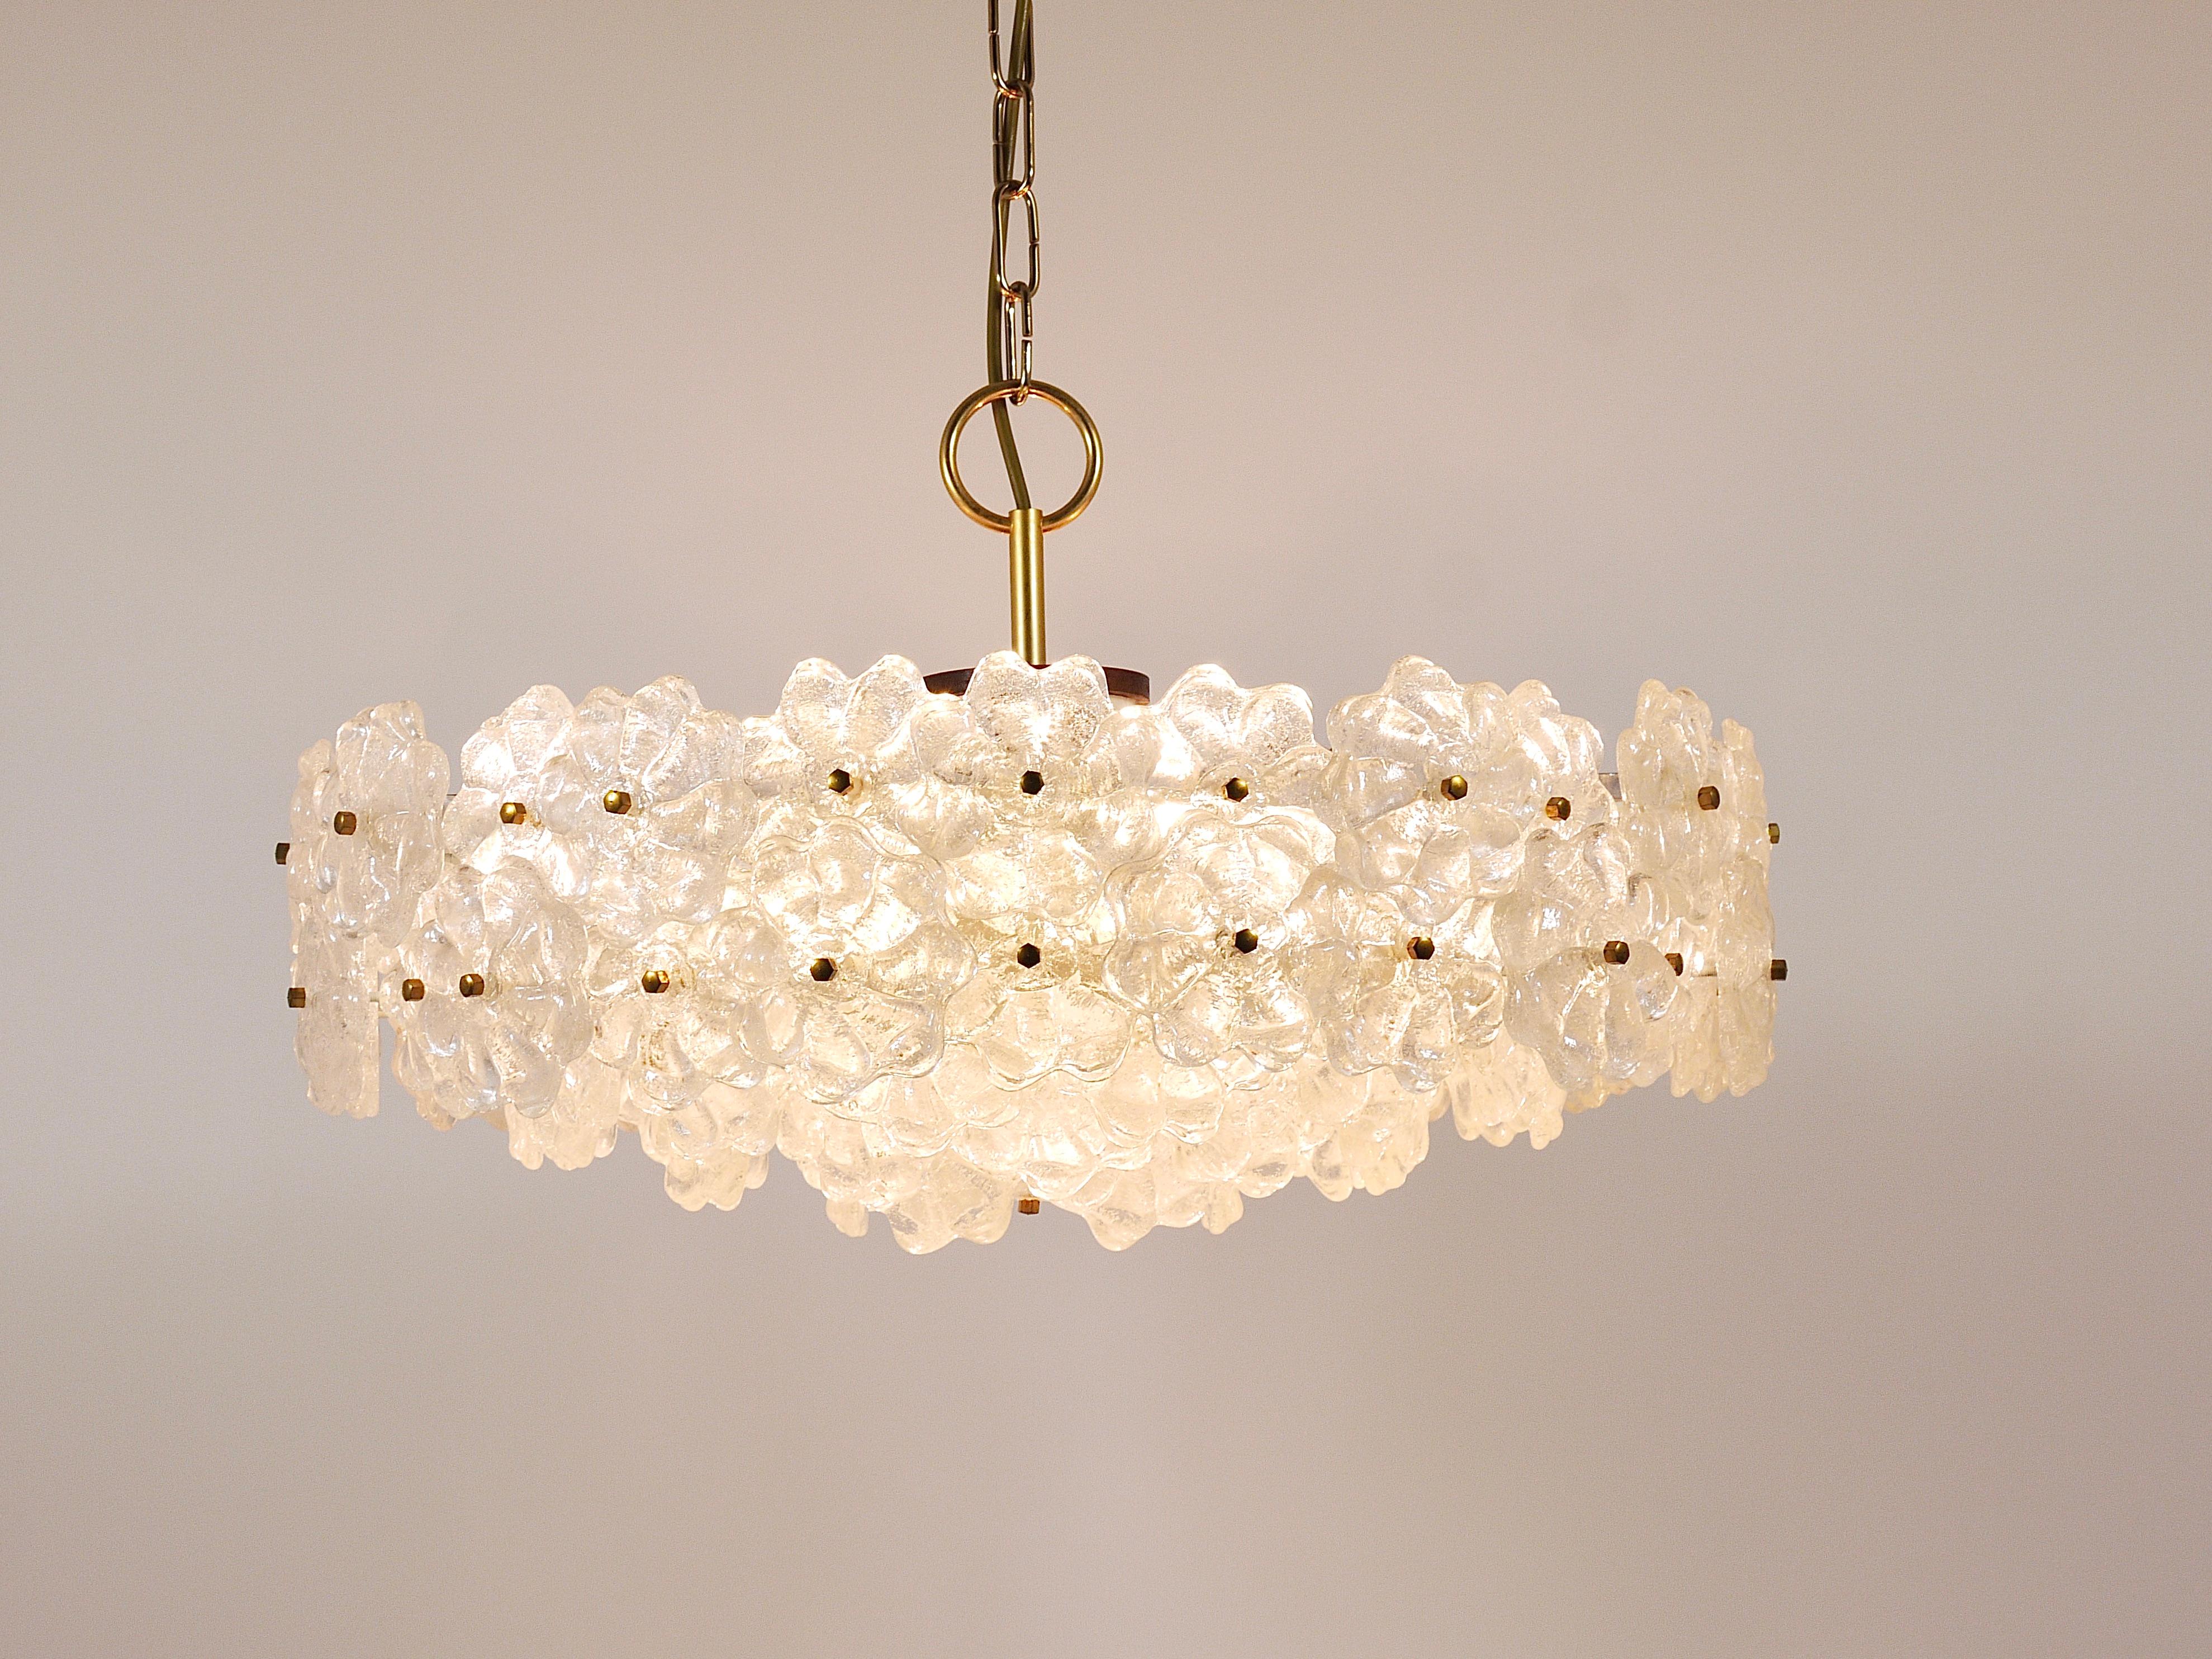 A decorative floral 22“ diameter Midcentury Modern brass chandelier from the 1960s manufactured by J.T. Kalmar Vienna, Austria. Its frame is made of white painted metal, it has four tiers covered with lovely lucite acrylic „melting glass